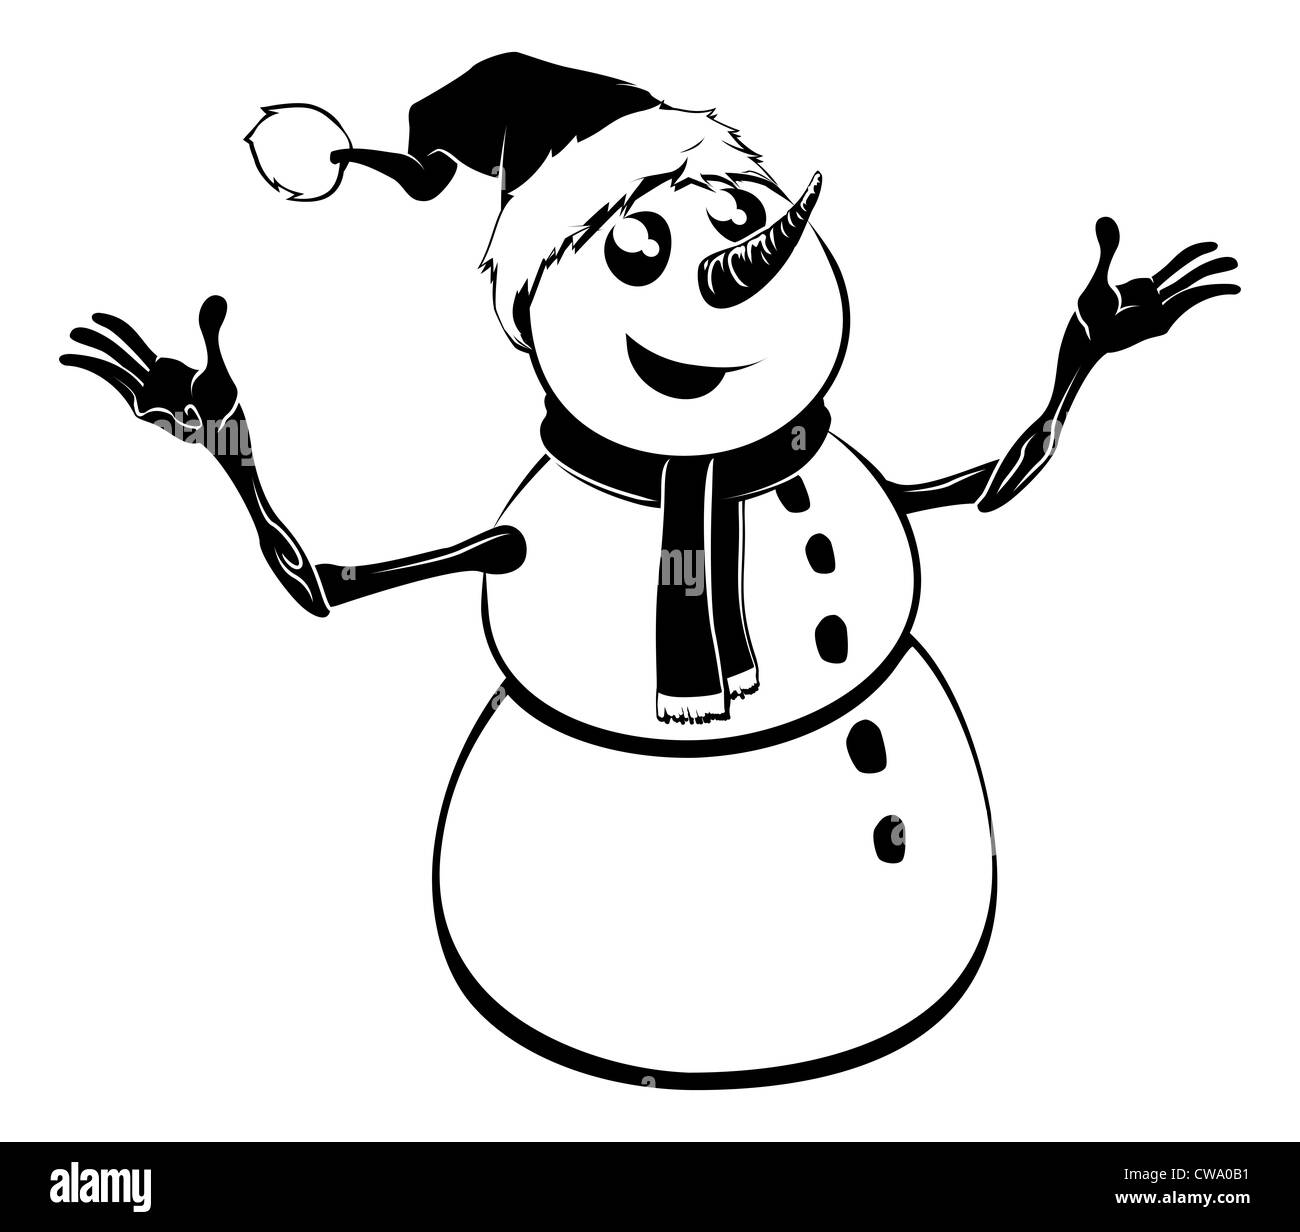 Black and white illustration of a Christmas snowman in Santa hat Stock Photo